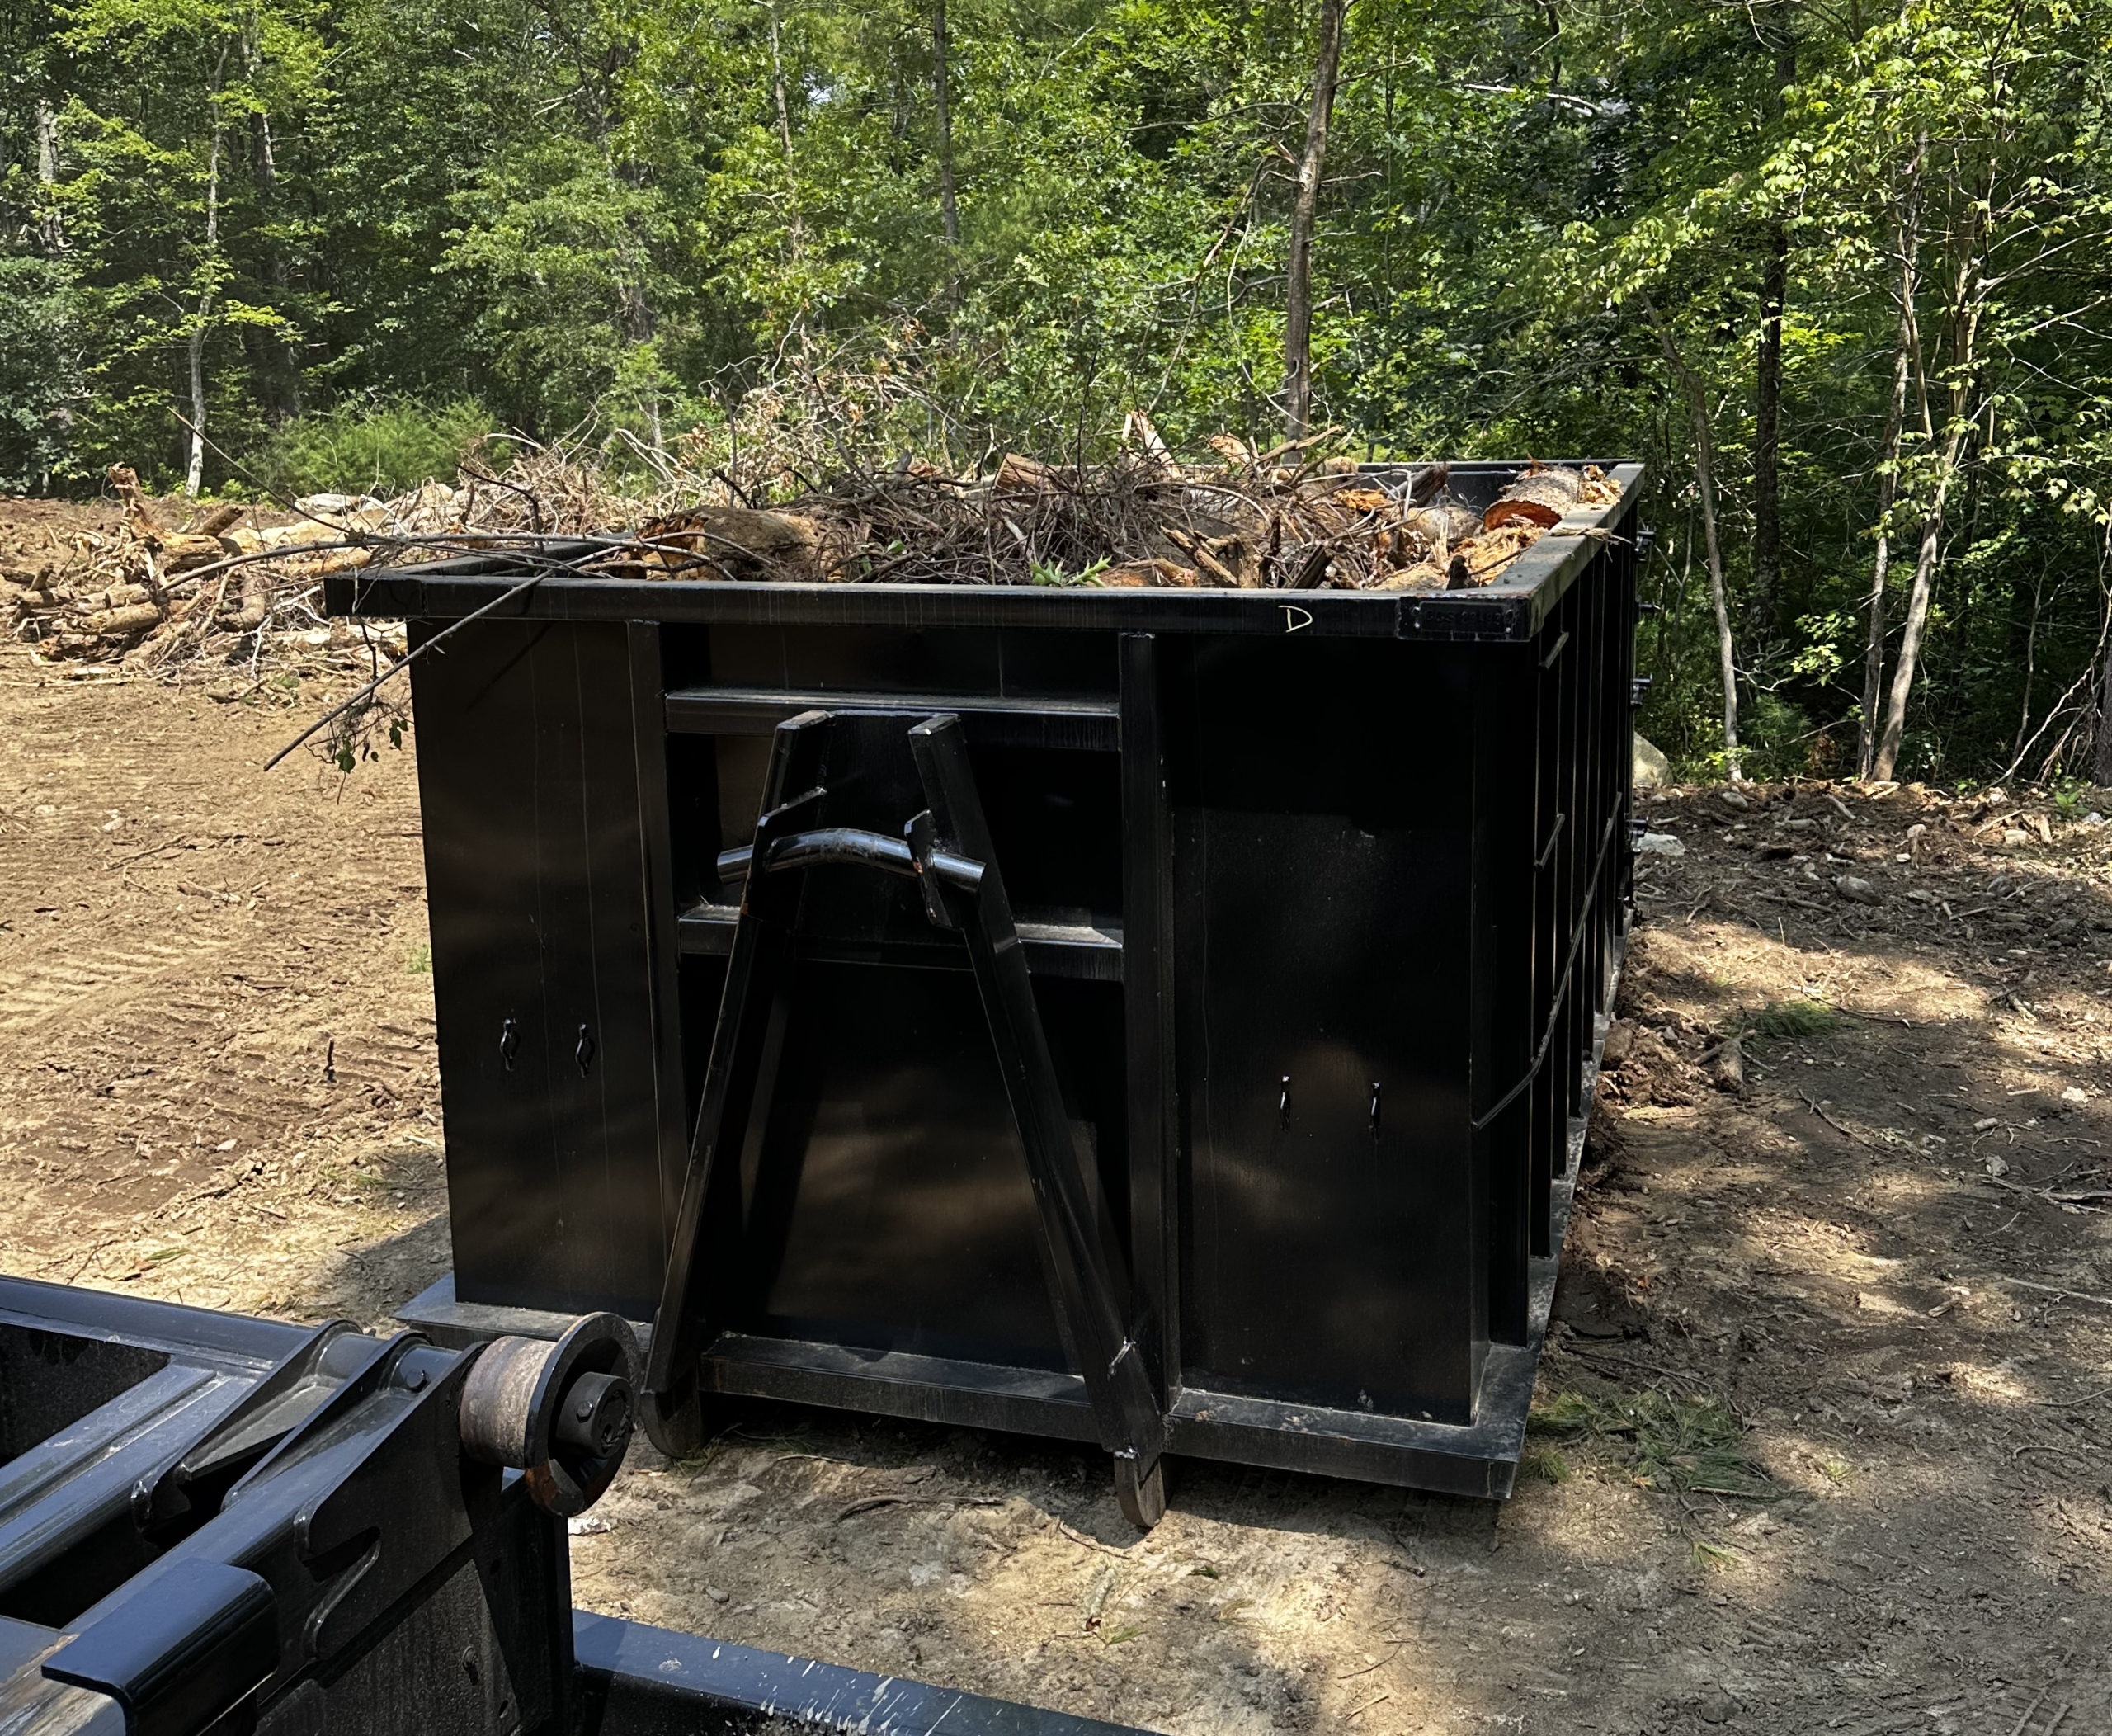 20 Yard Dumpster Full Of Stumps And Yard Waste in Rochester, Ma